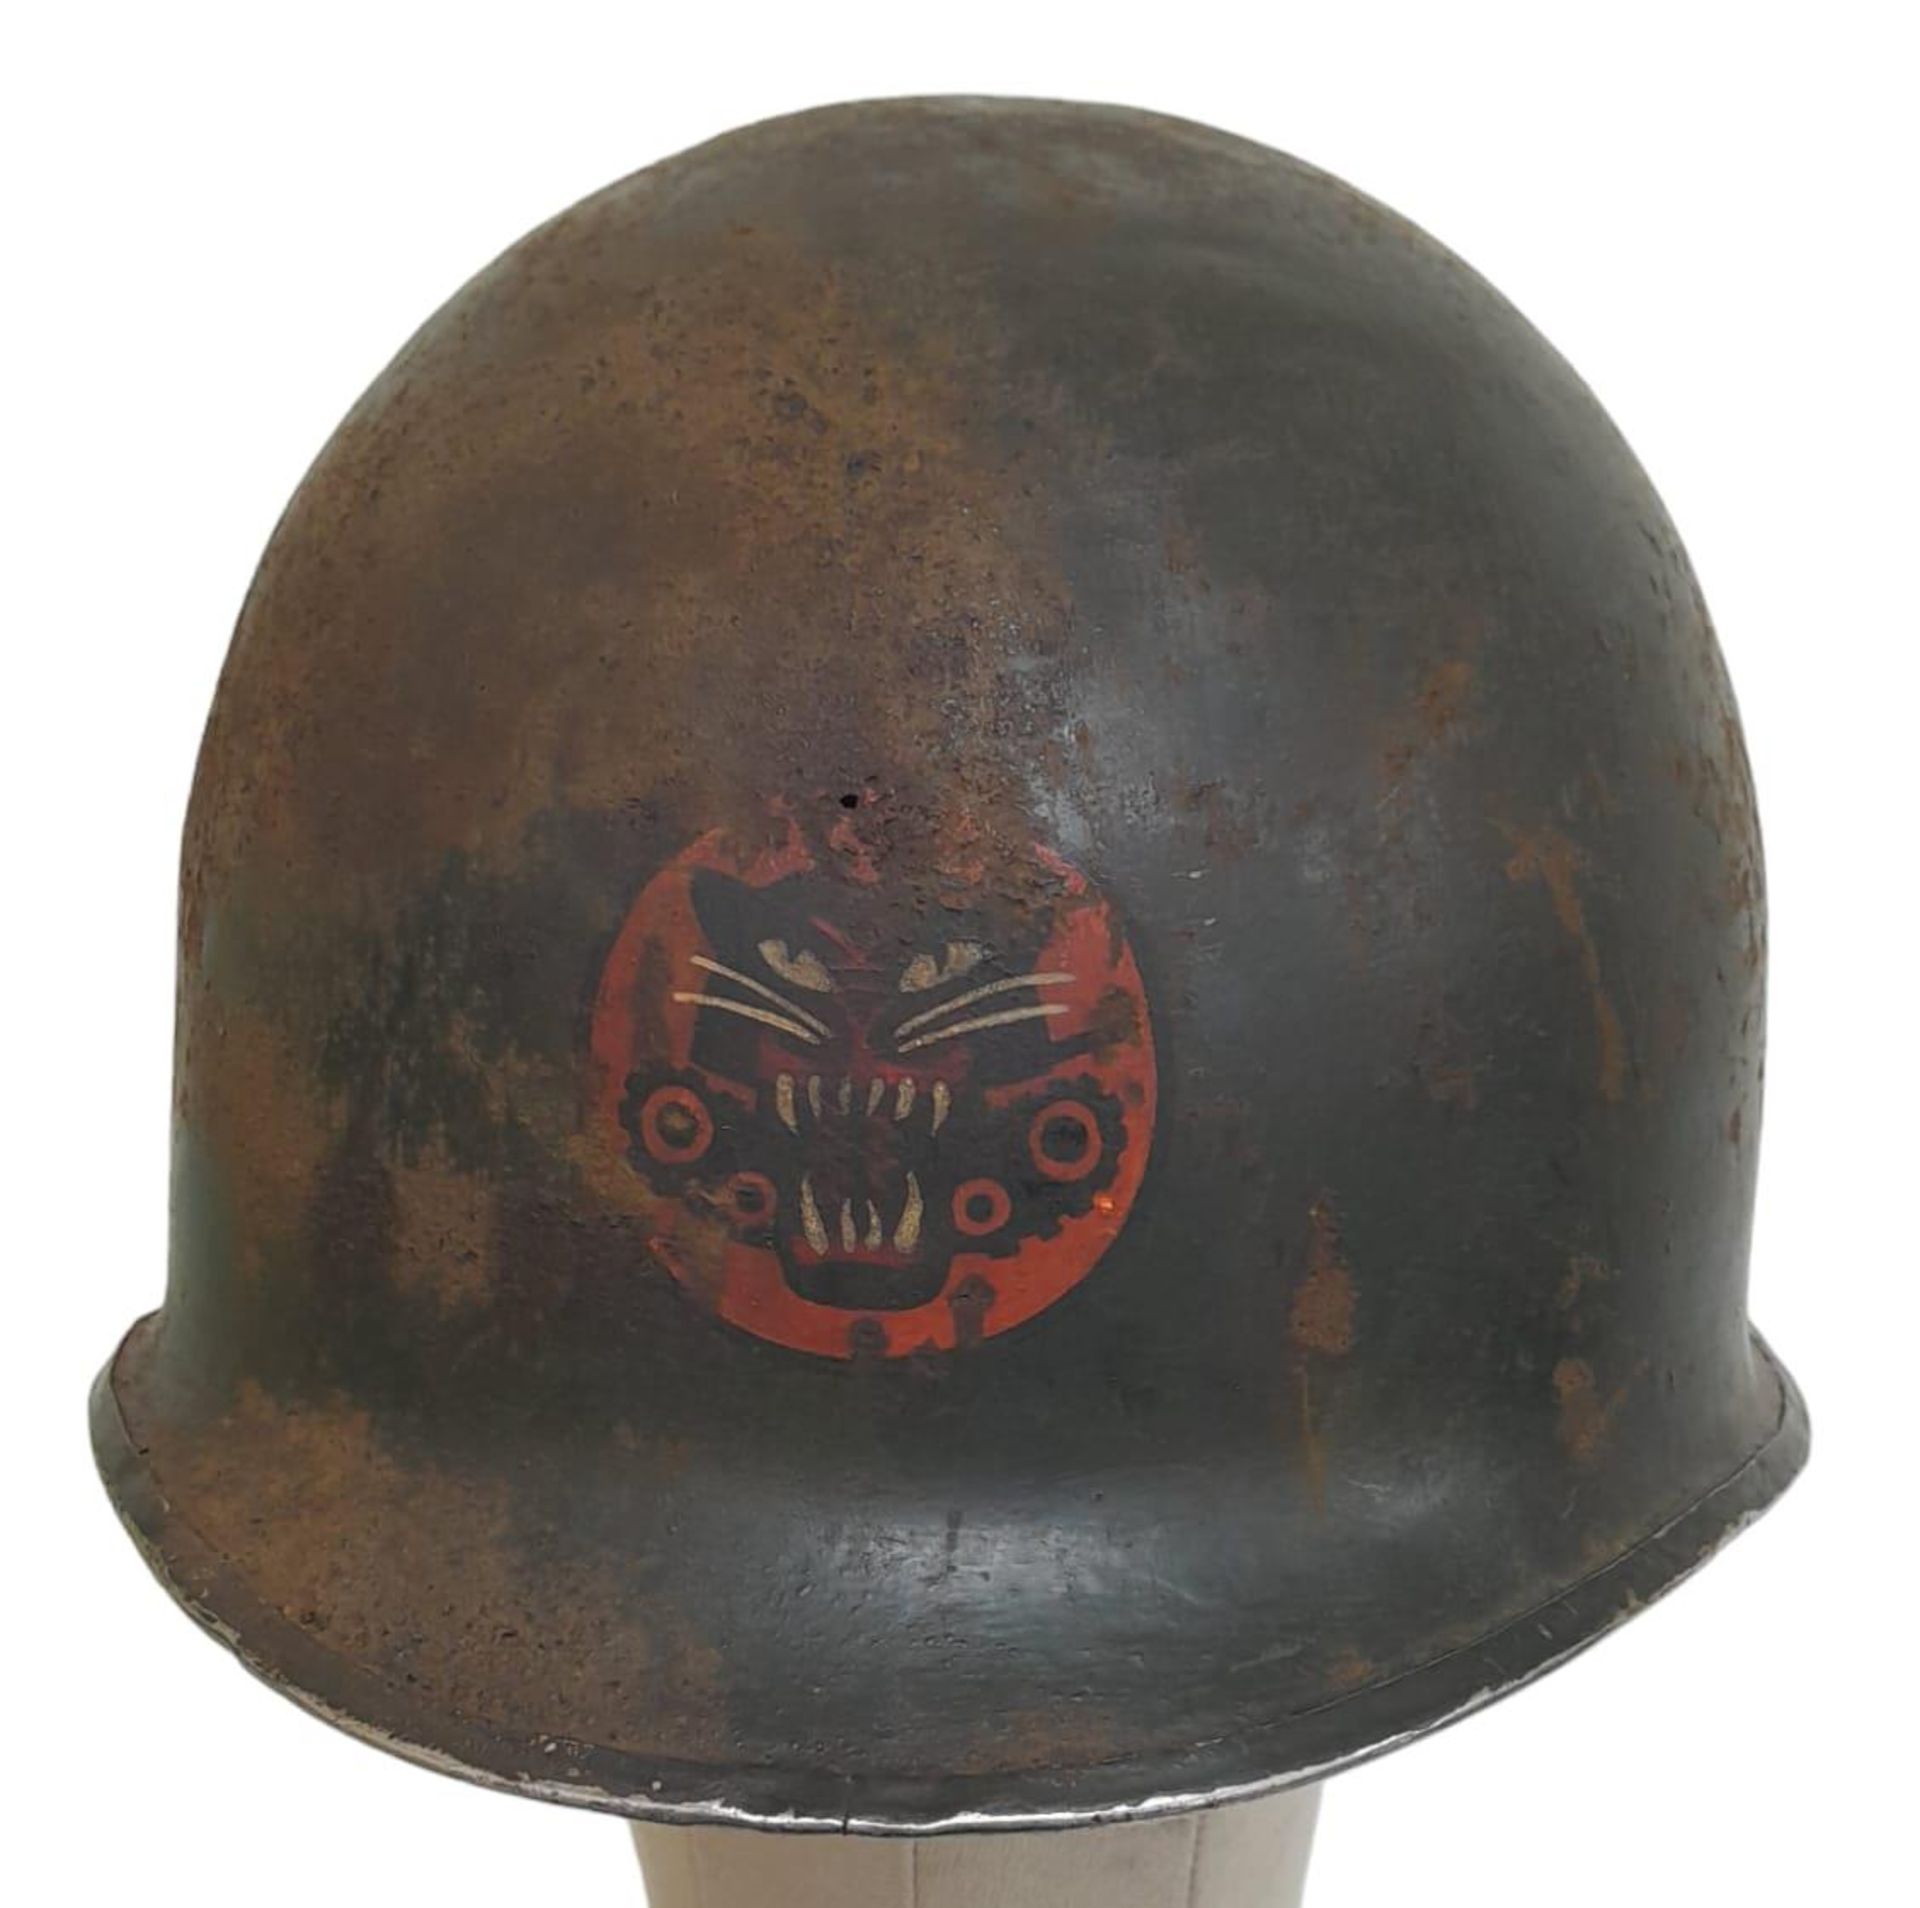 WW2 US Front Seam Swivel Bale M1 Helmet. Badged to a Tank Destroyer Unit. Found in a junk shop